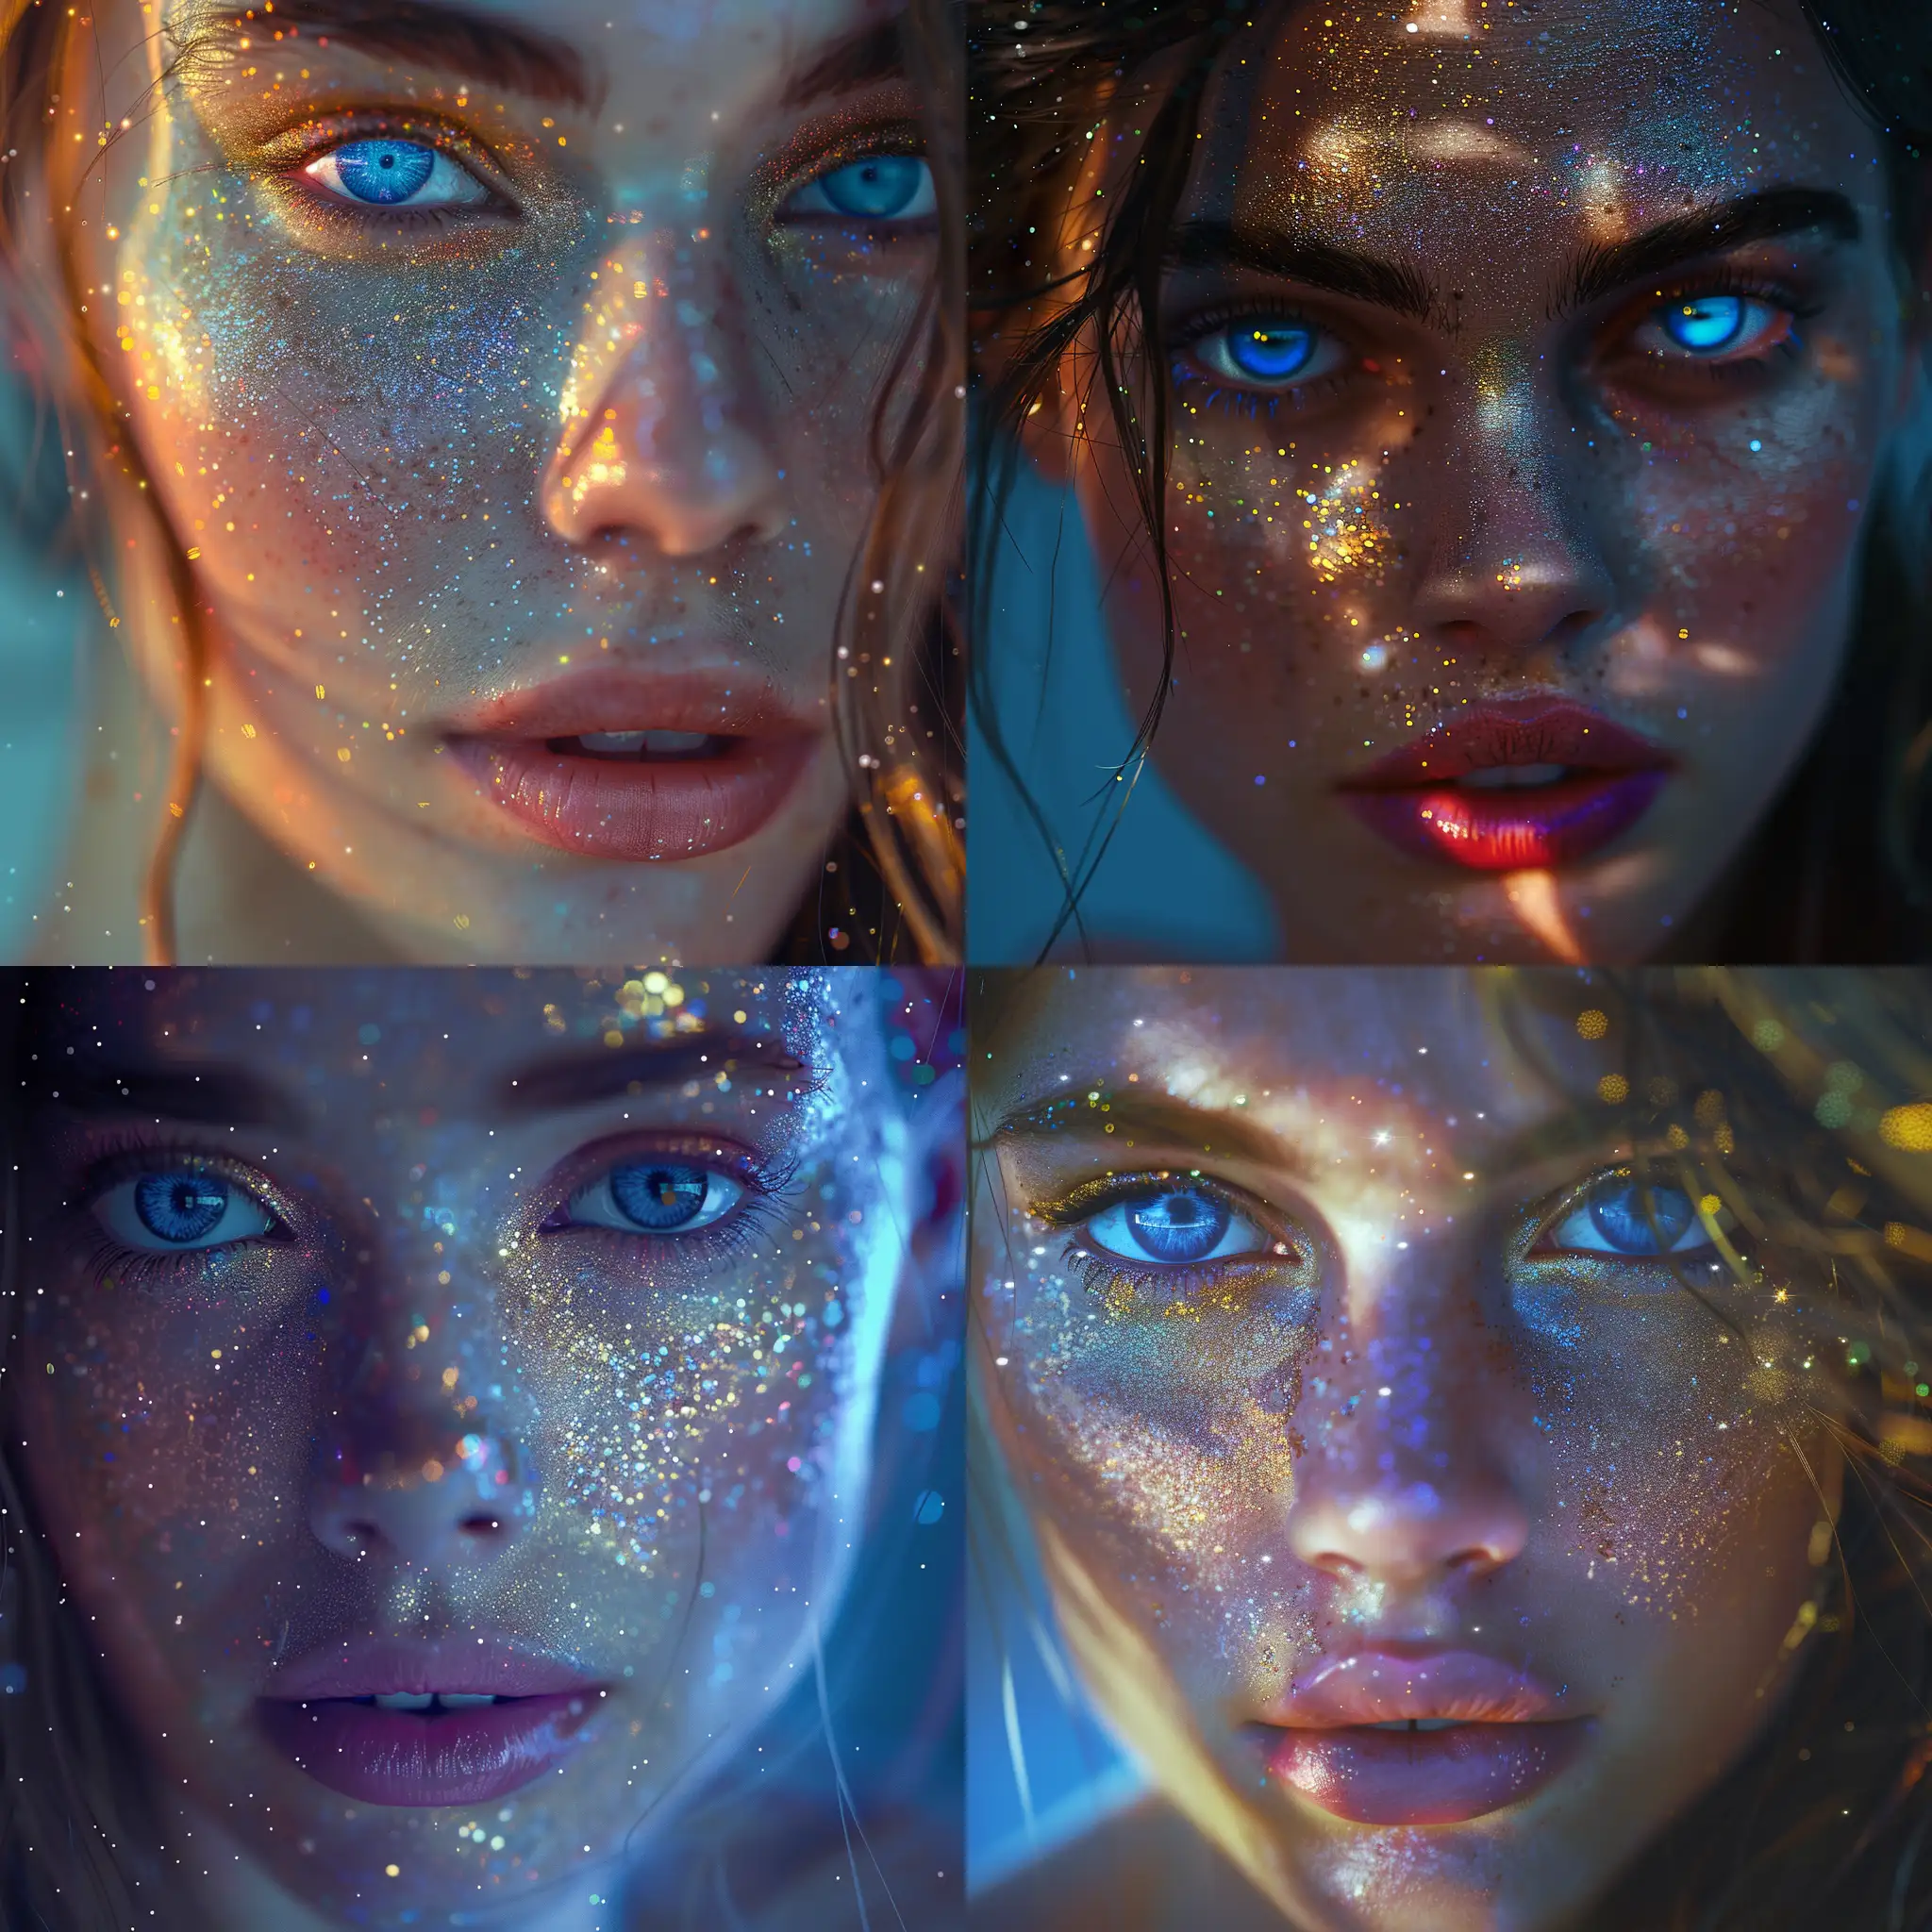 Mesmerizing-Portrait-of-a-Woman-with-Blue-Eyes-and-Glitter-Makeup-in-Ultra-HD